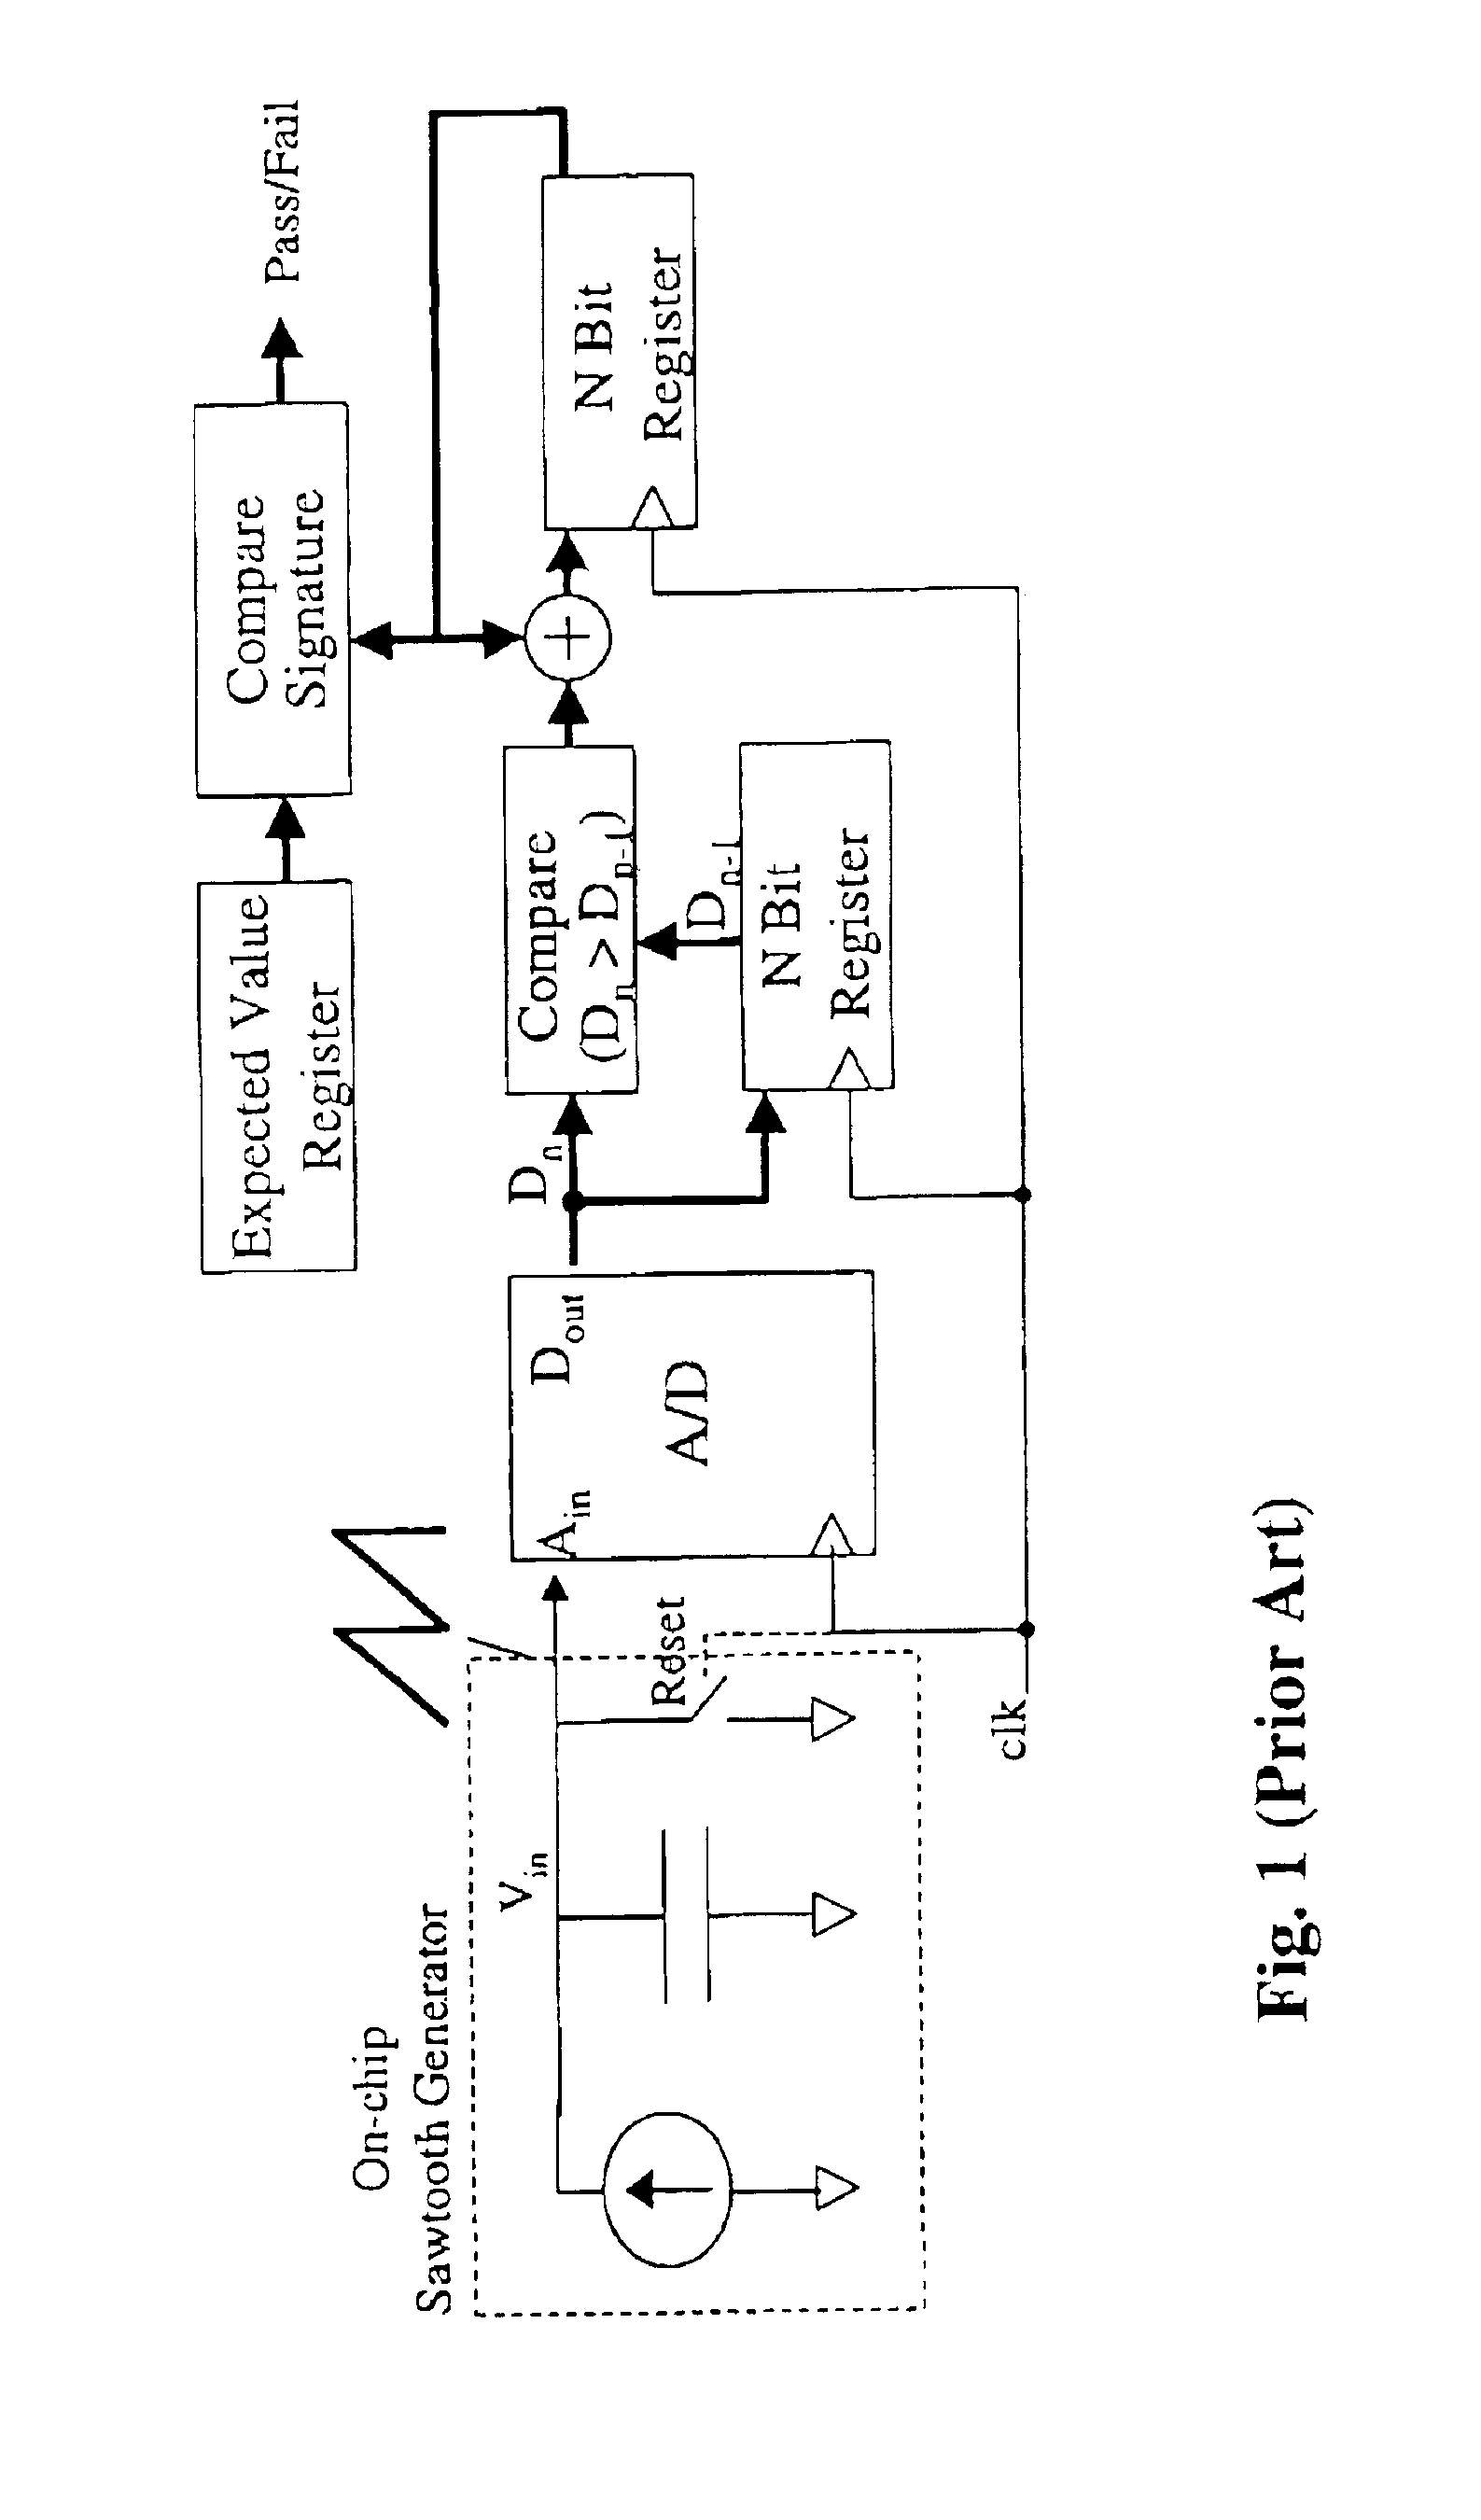 Integrated excitation/extraction system for test and measurement